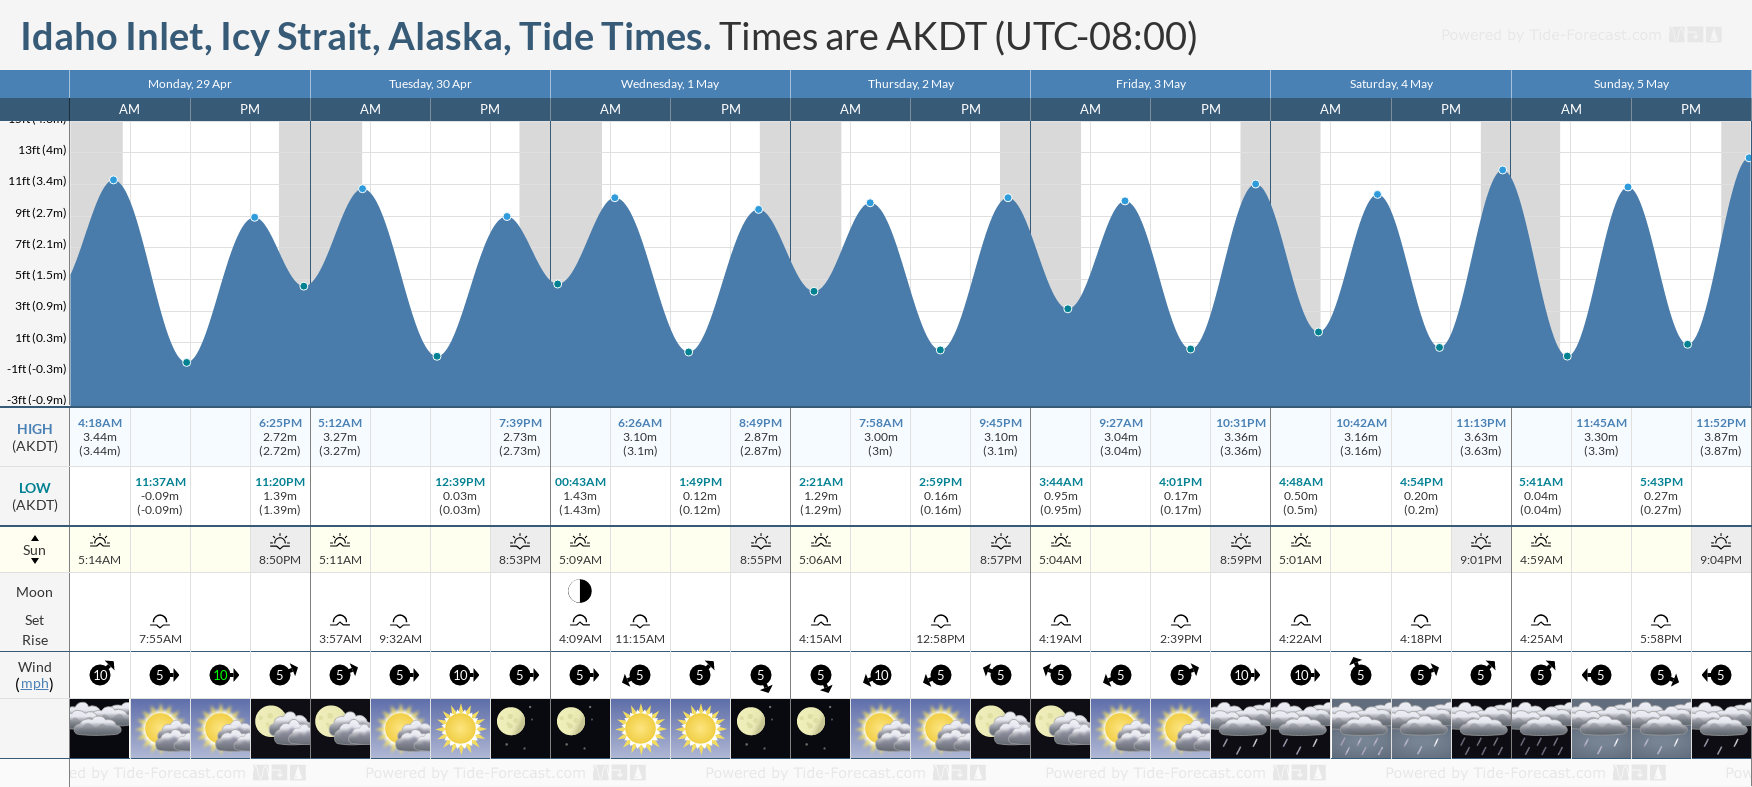 Idaho Inlet, Icy Strait, Alaska Tide Chart including high and low tide tide times for the next 7 days